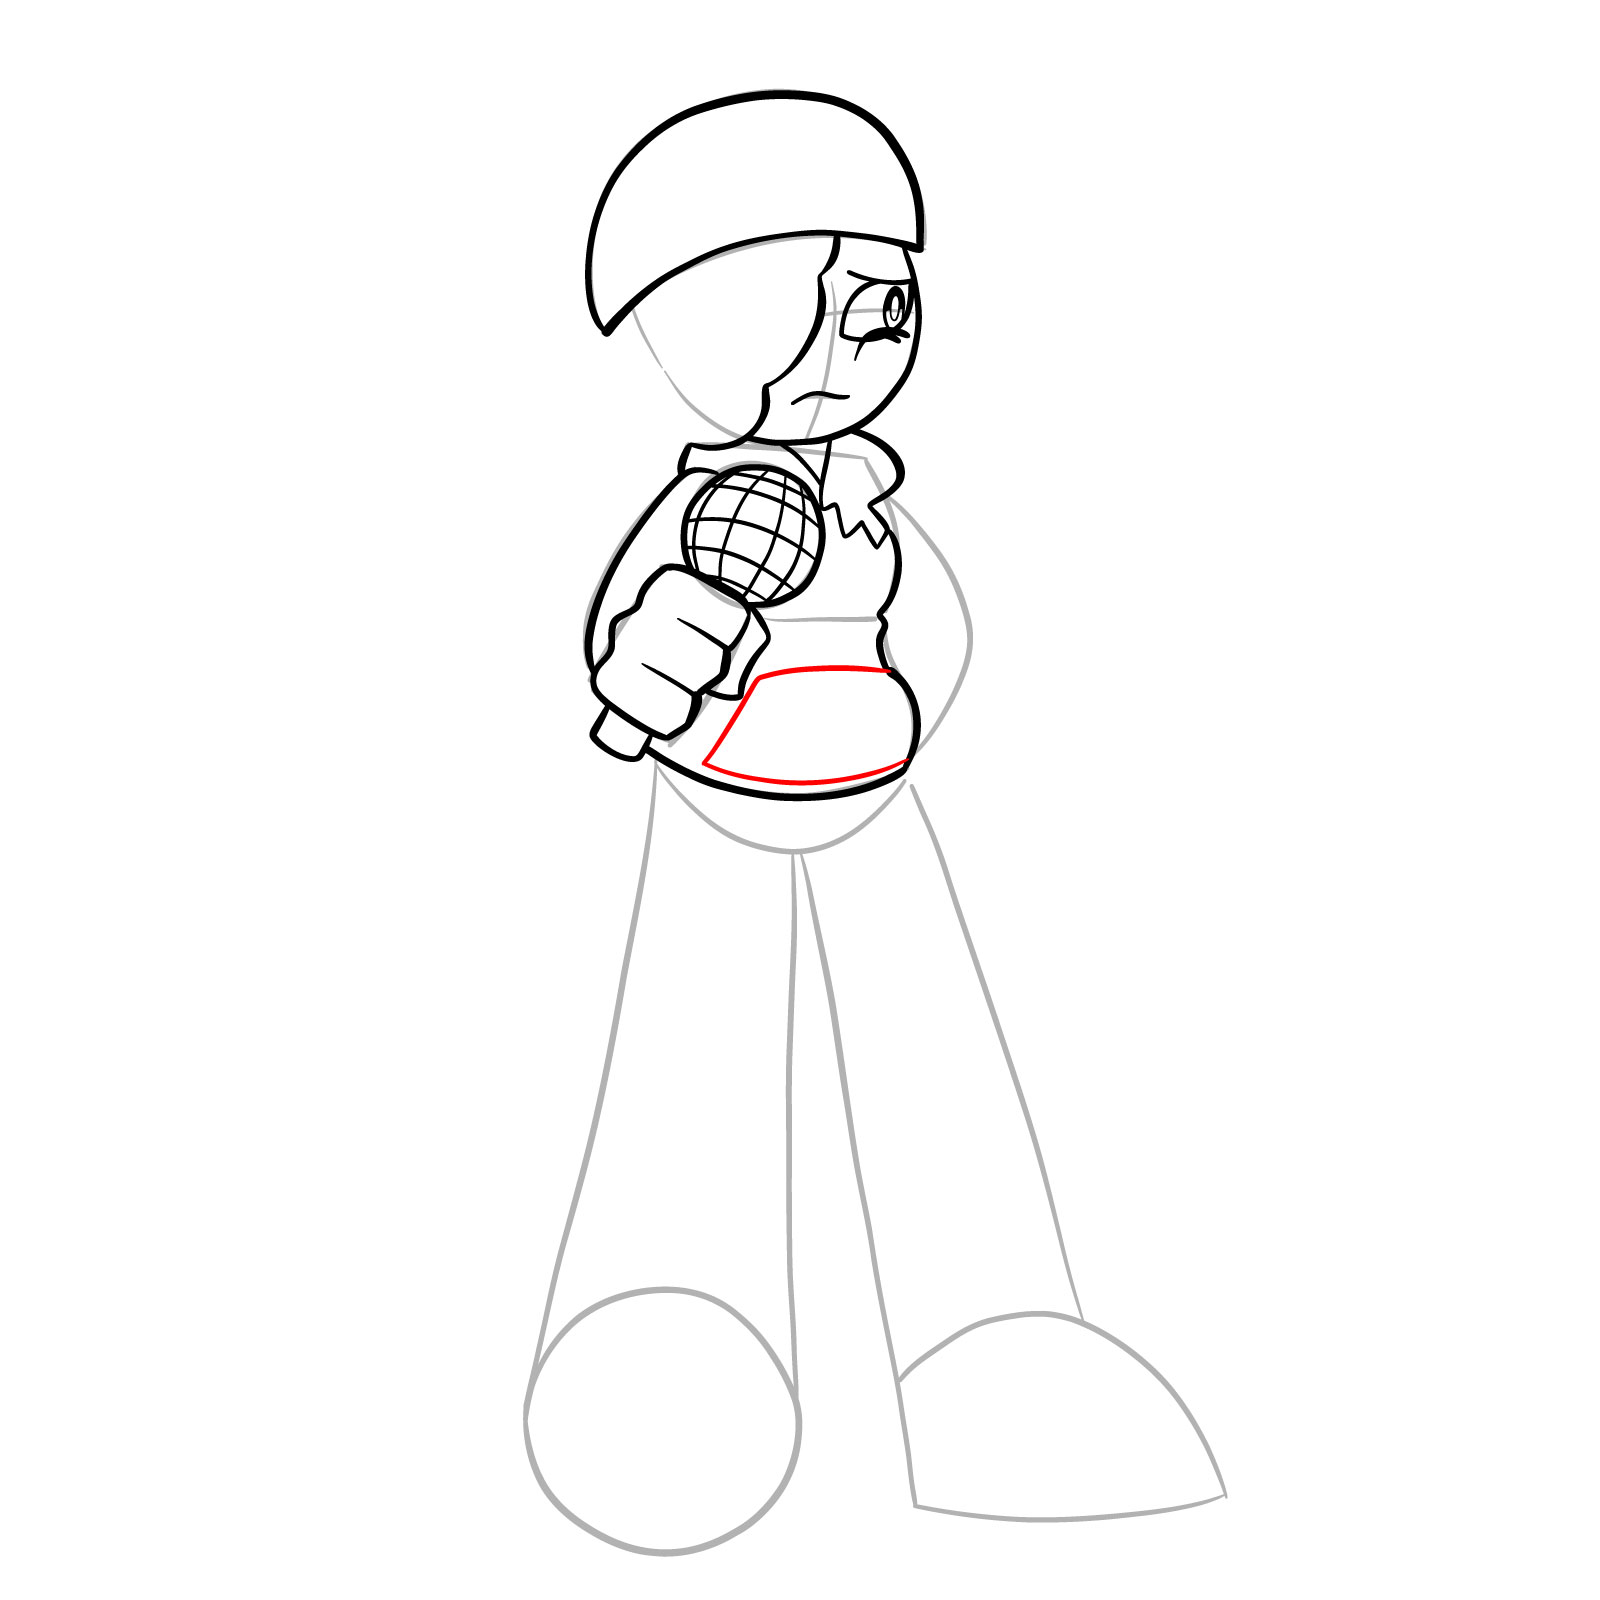 How to draw Ruby from FNF - step 18